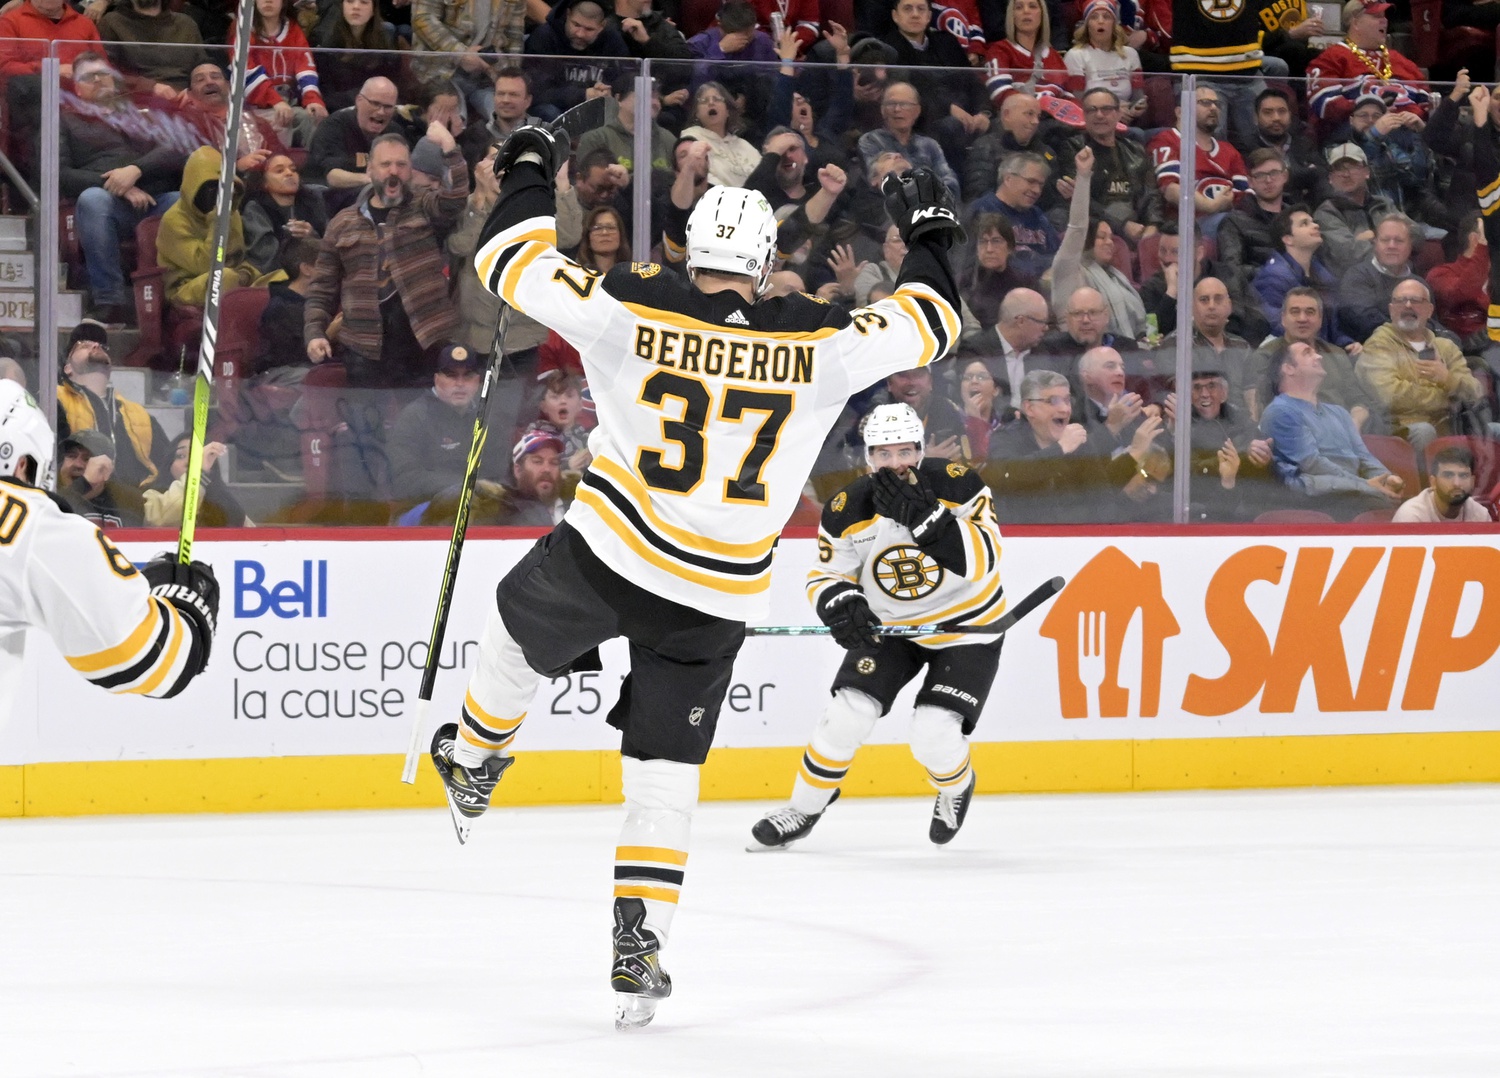 Jan 24, 2023; Montreal, Quebec, CAN; Boston Bruins forward Patrice Bergeron (37) celebrates after scoring a goal against the Montreal Canadiens during the third period at the Bell Centre. Mandatory Credit: Eric Bolte/USA TODAY Sport